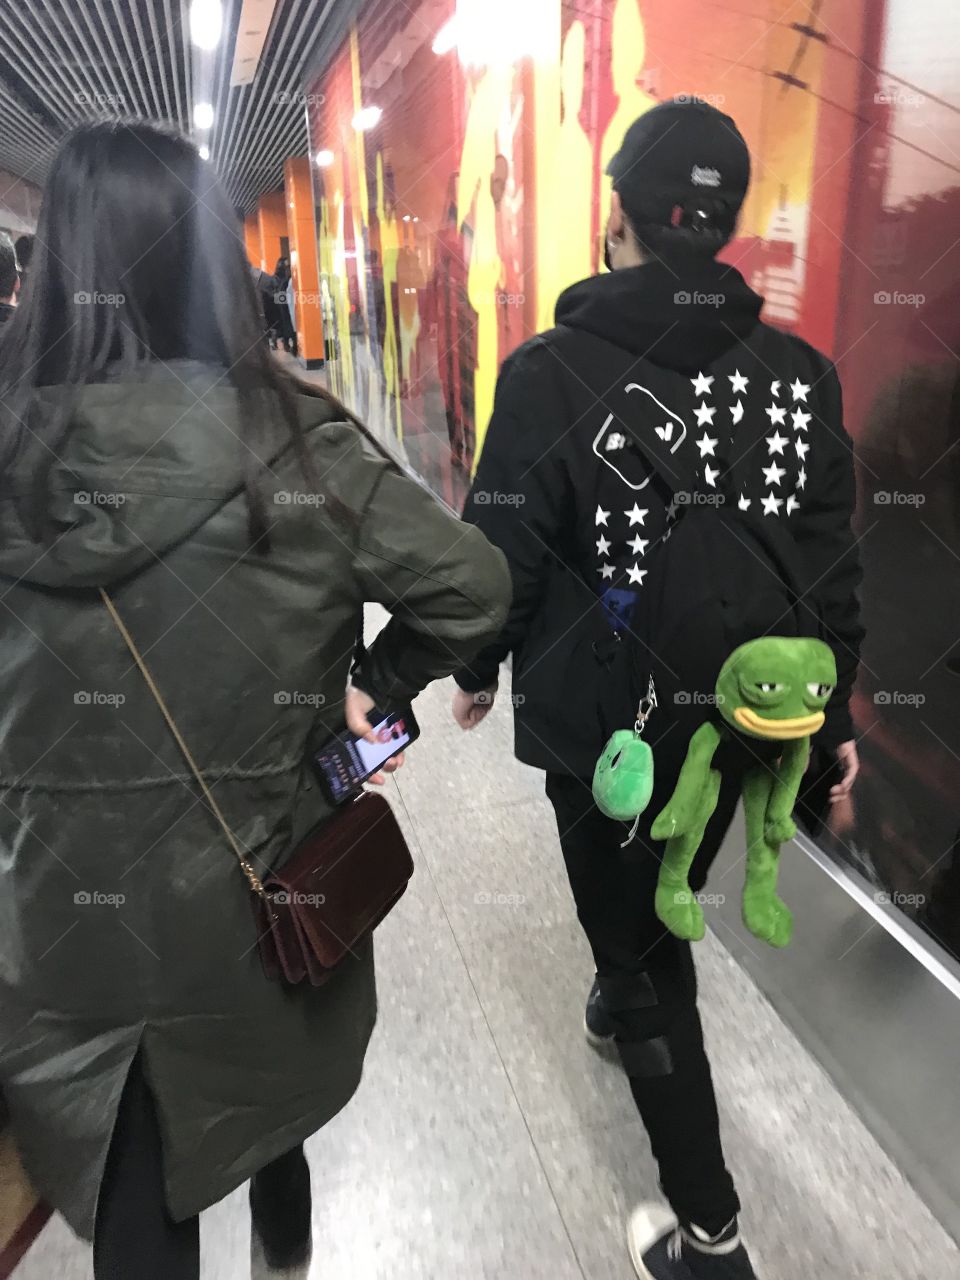 Shanghai style - of course every backpack should have a stuffed animal attached to it